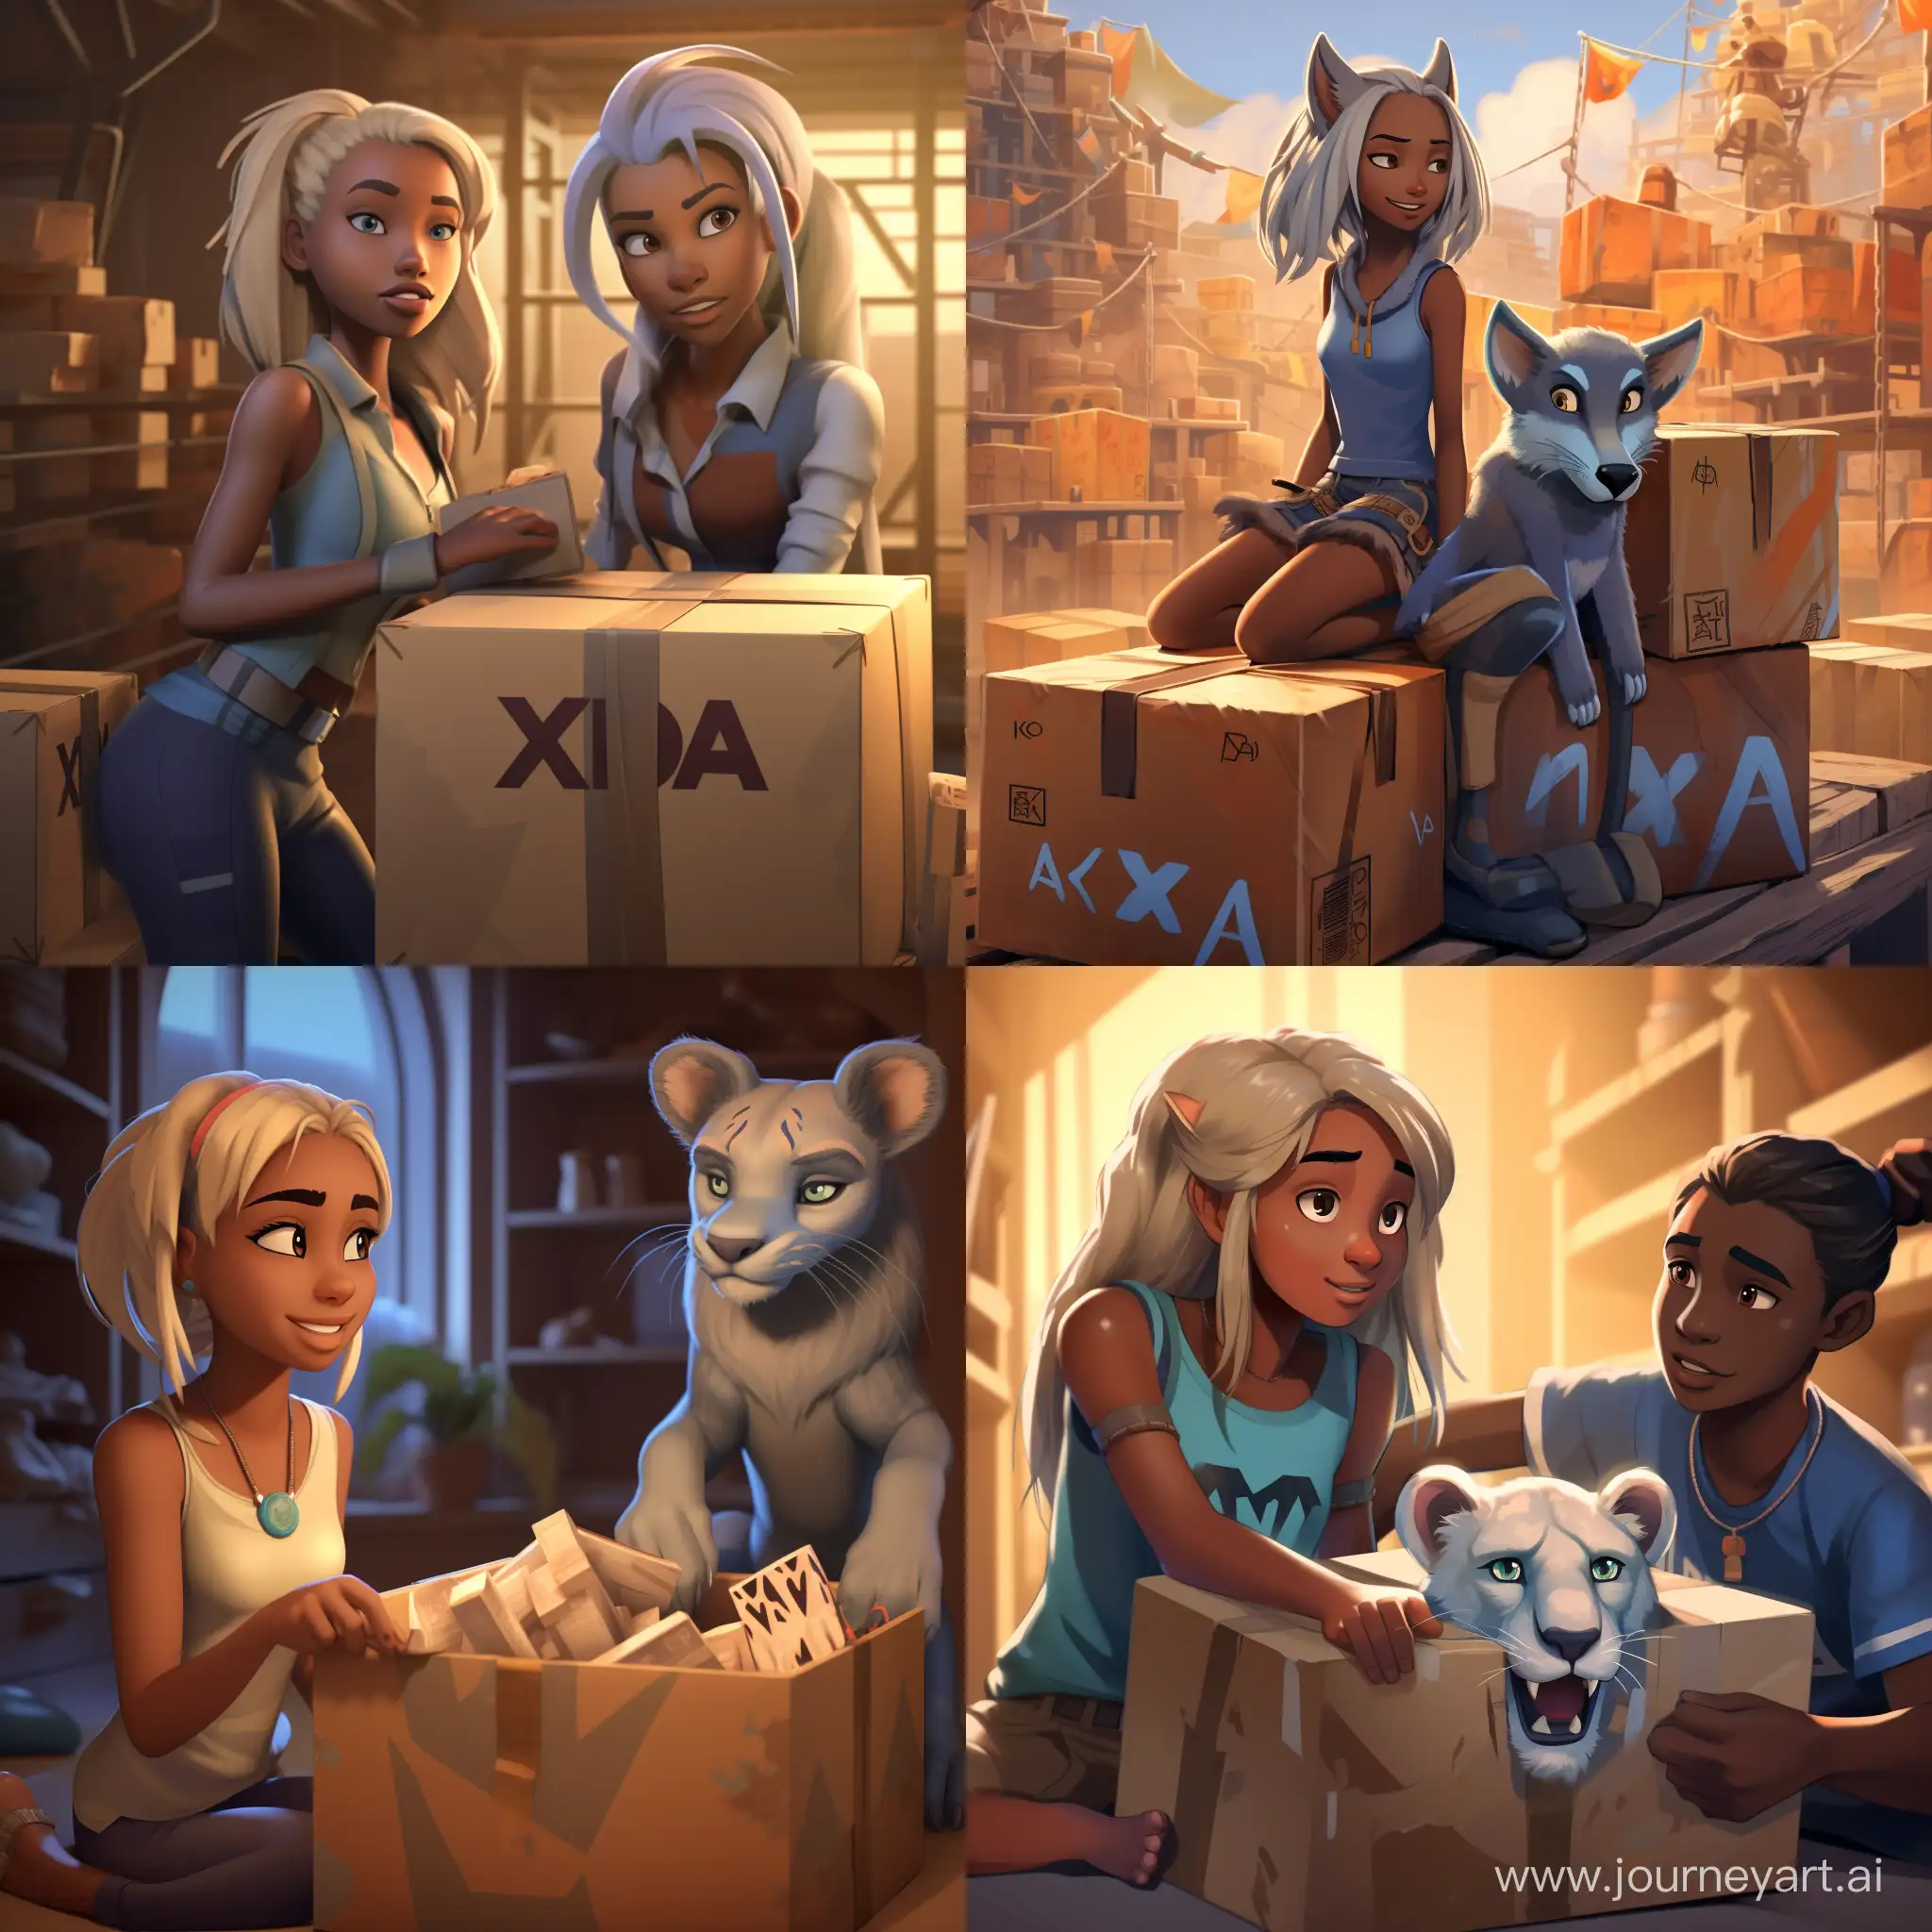 "kida from atlantis" helping "yax from zootopia" move boxes